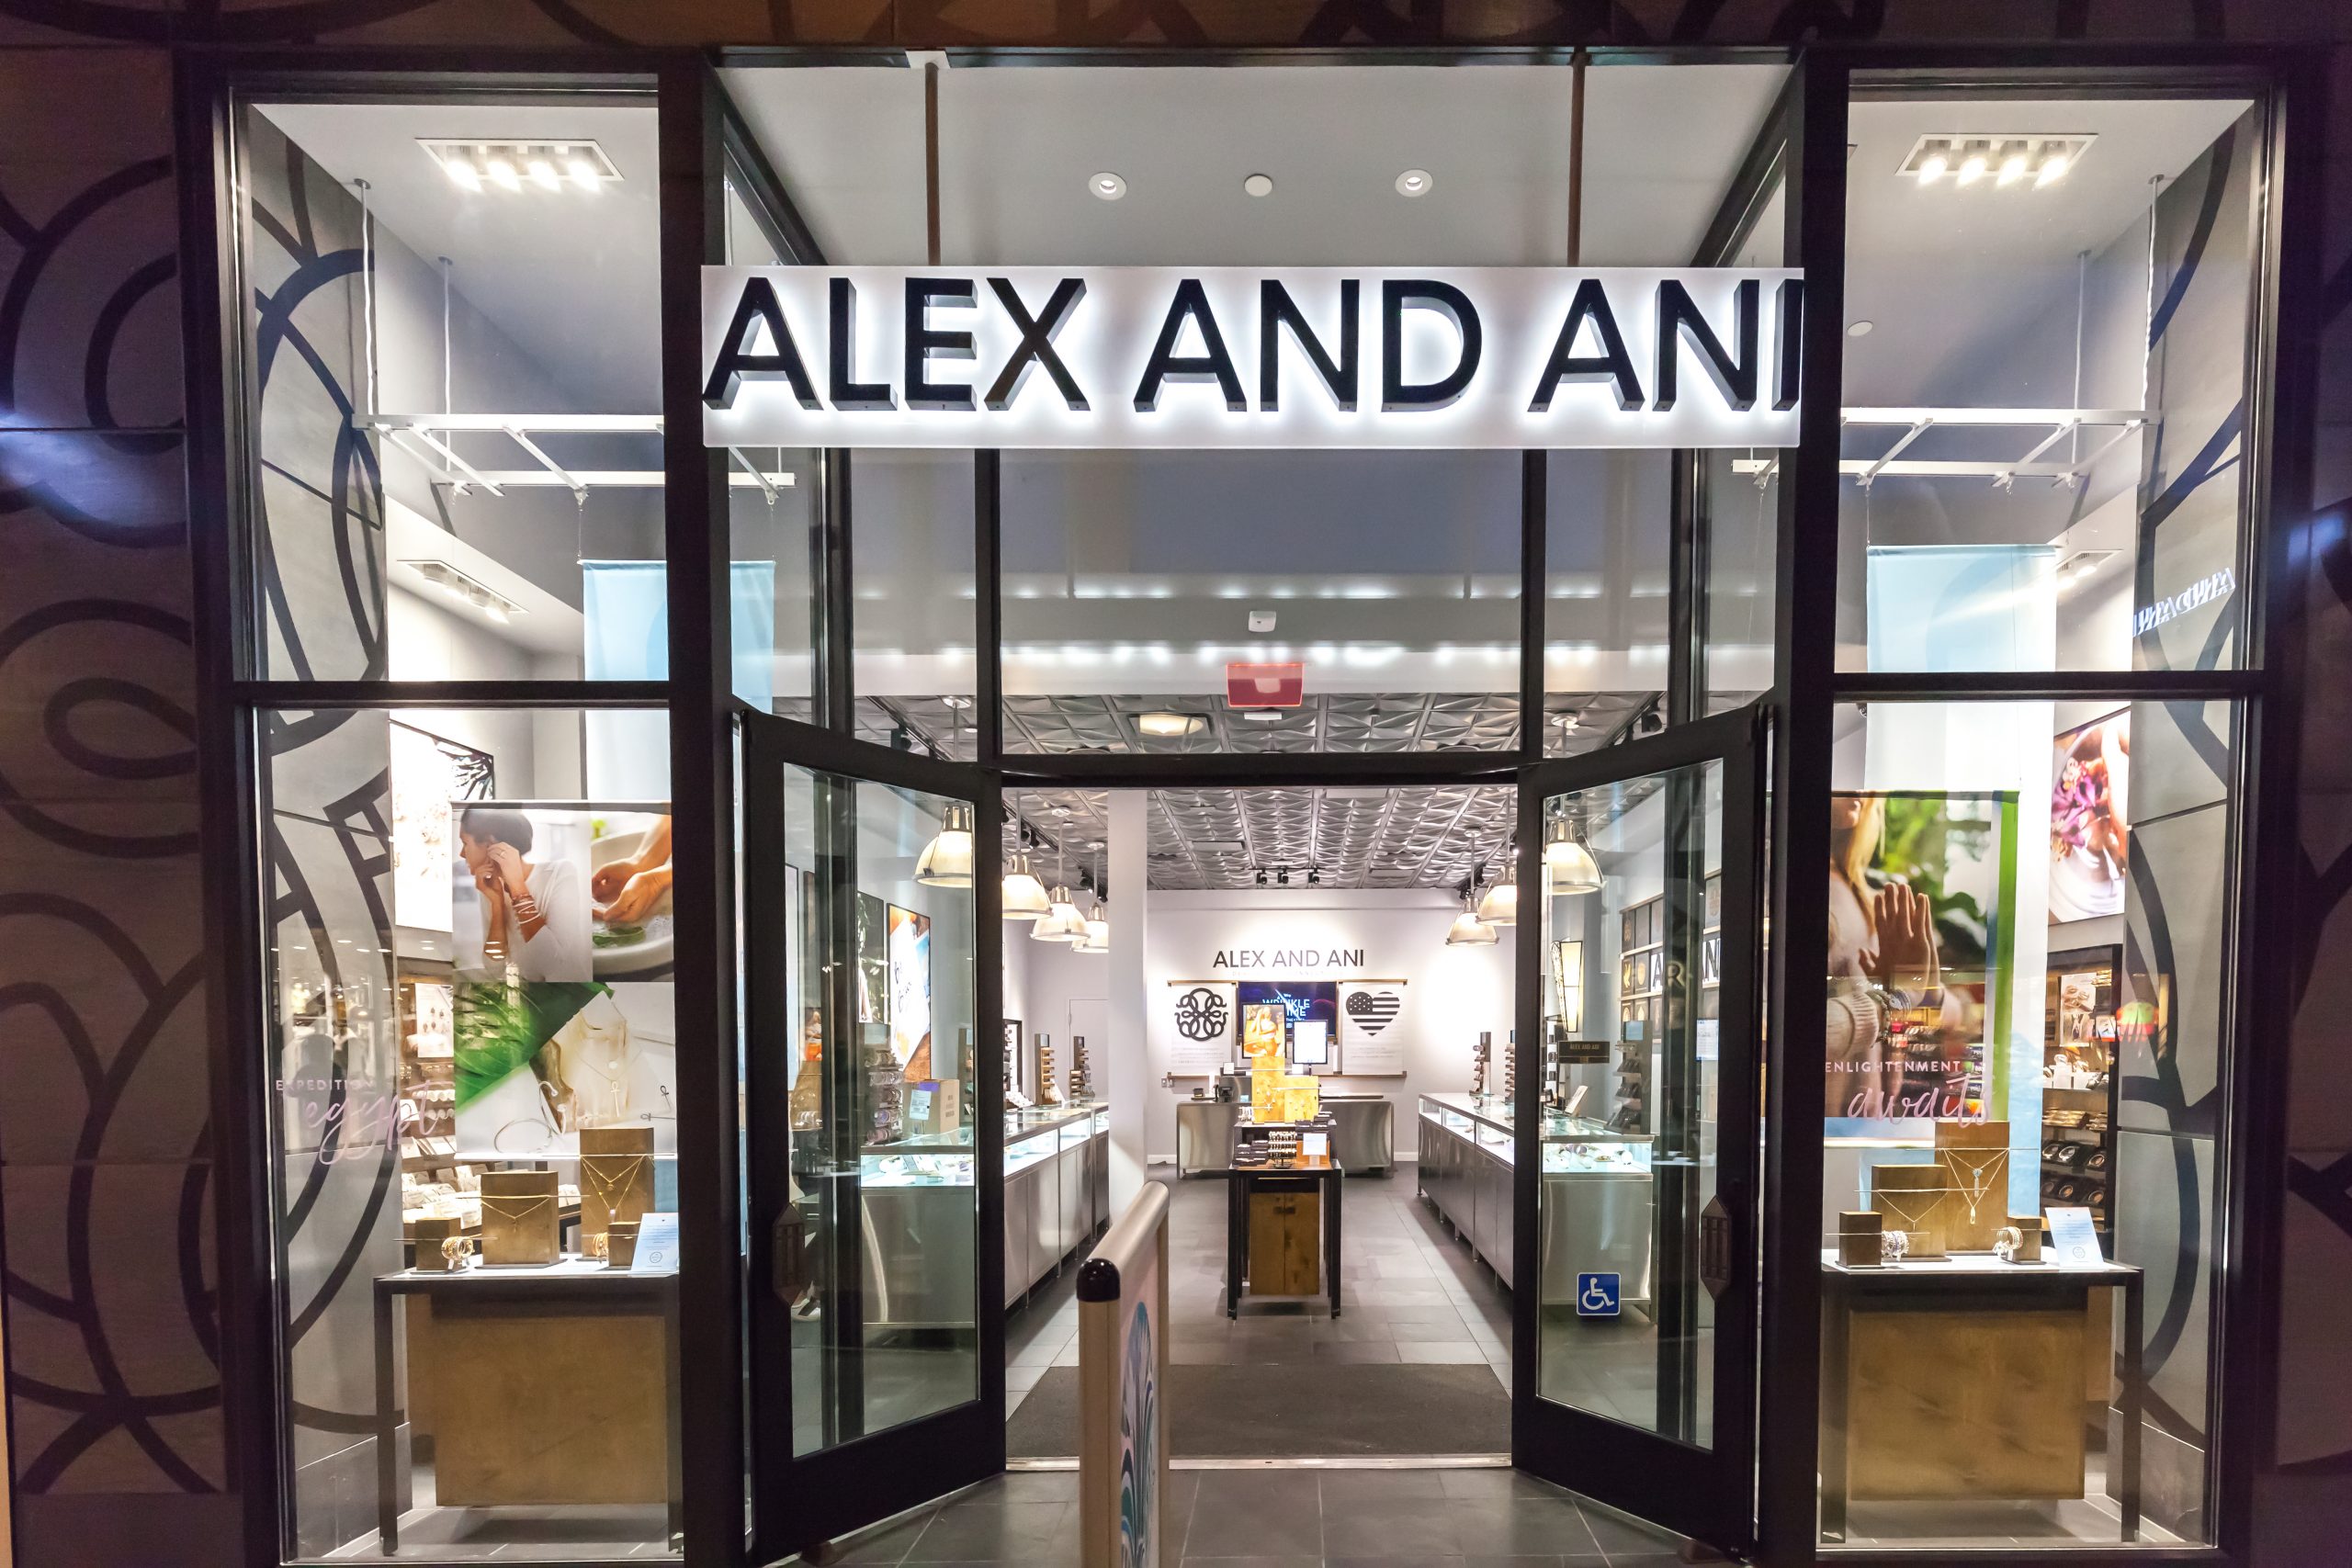 Alex and Ani Files Chapter 11